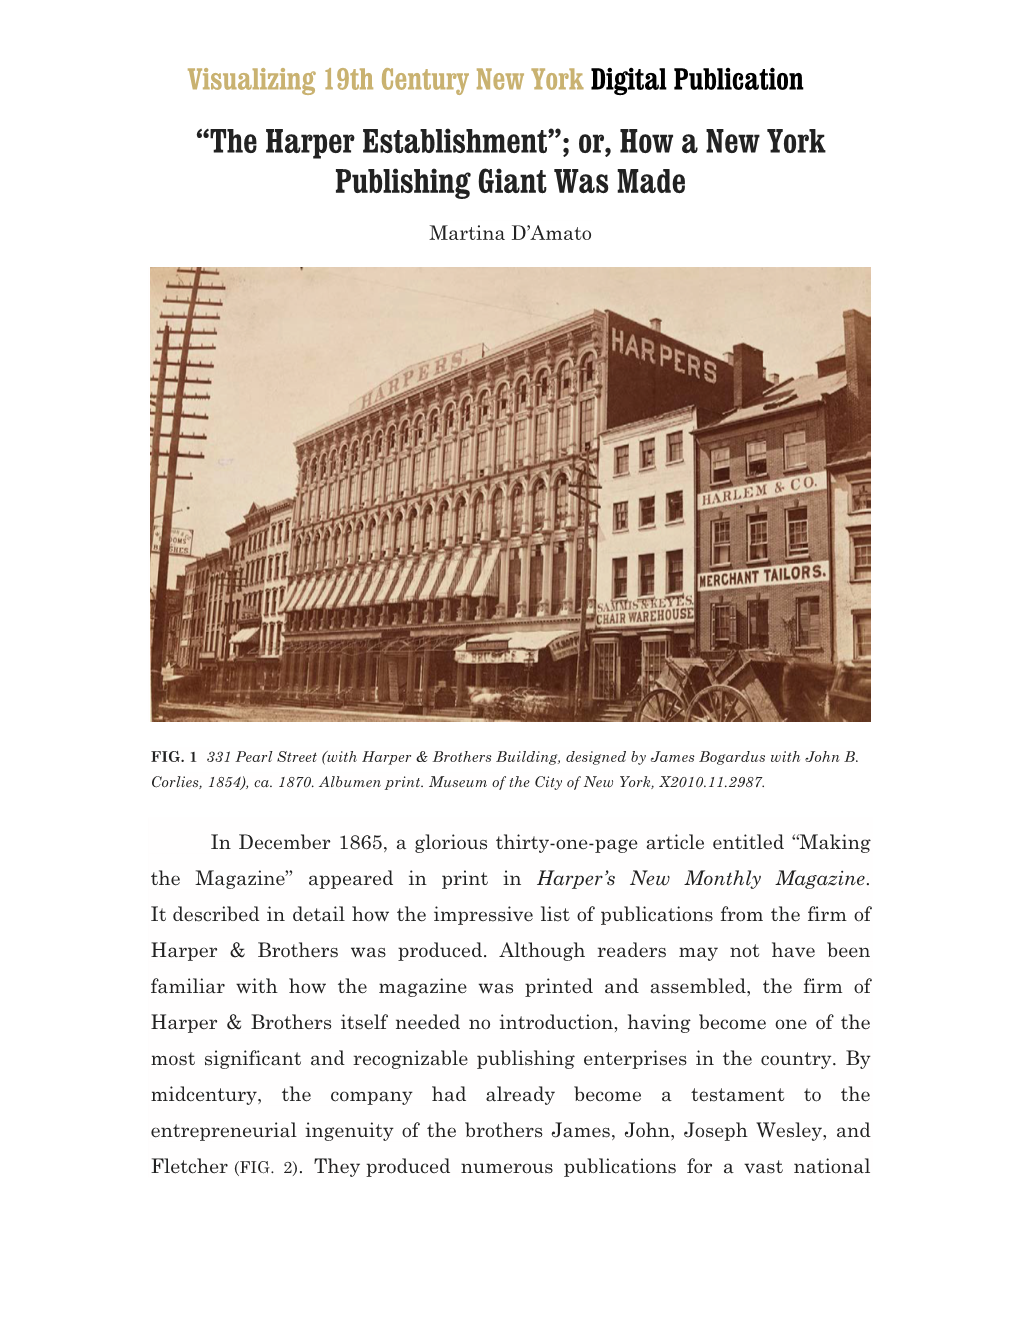 “The Harper Establishment”; Or, How a New York Publishing Giant Was Made